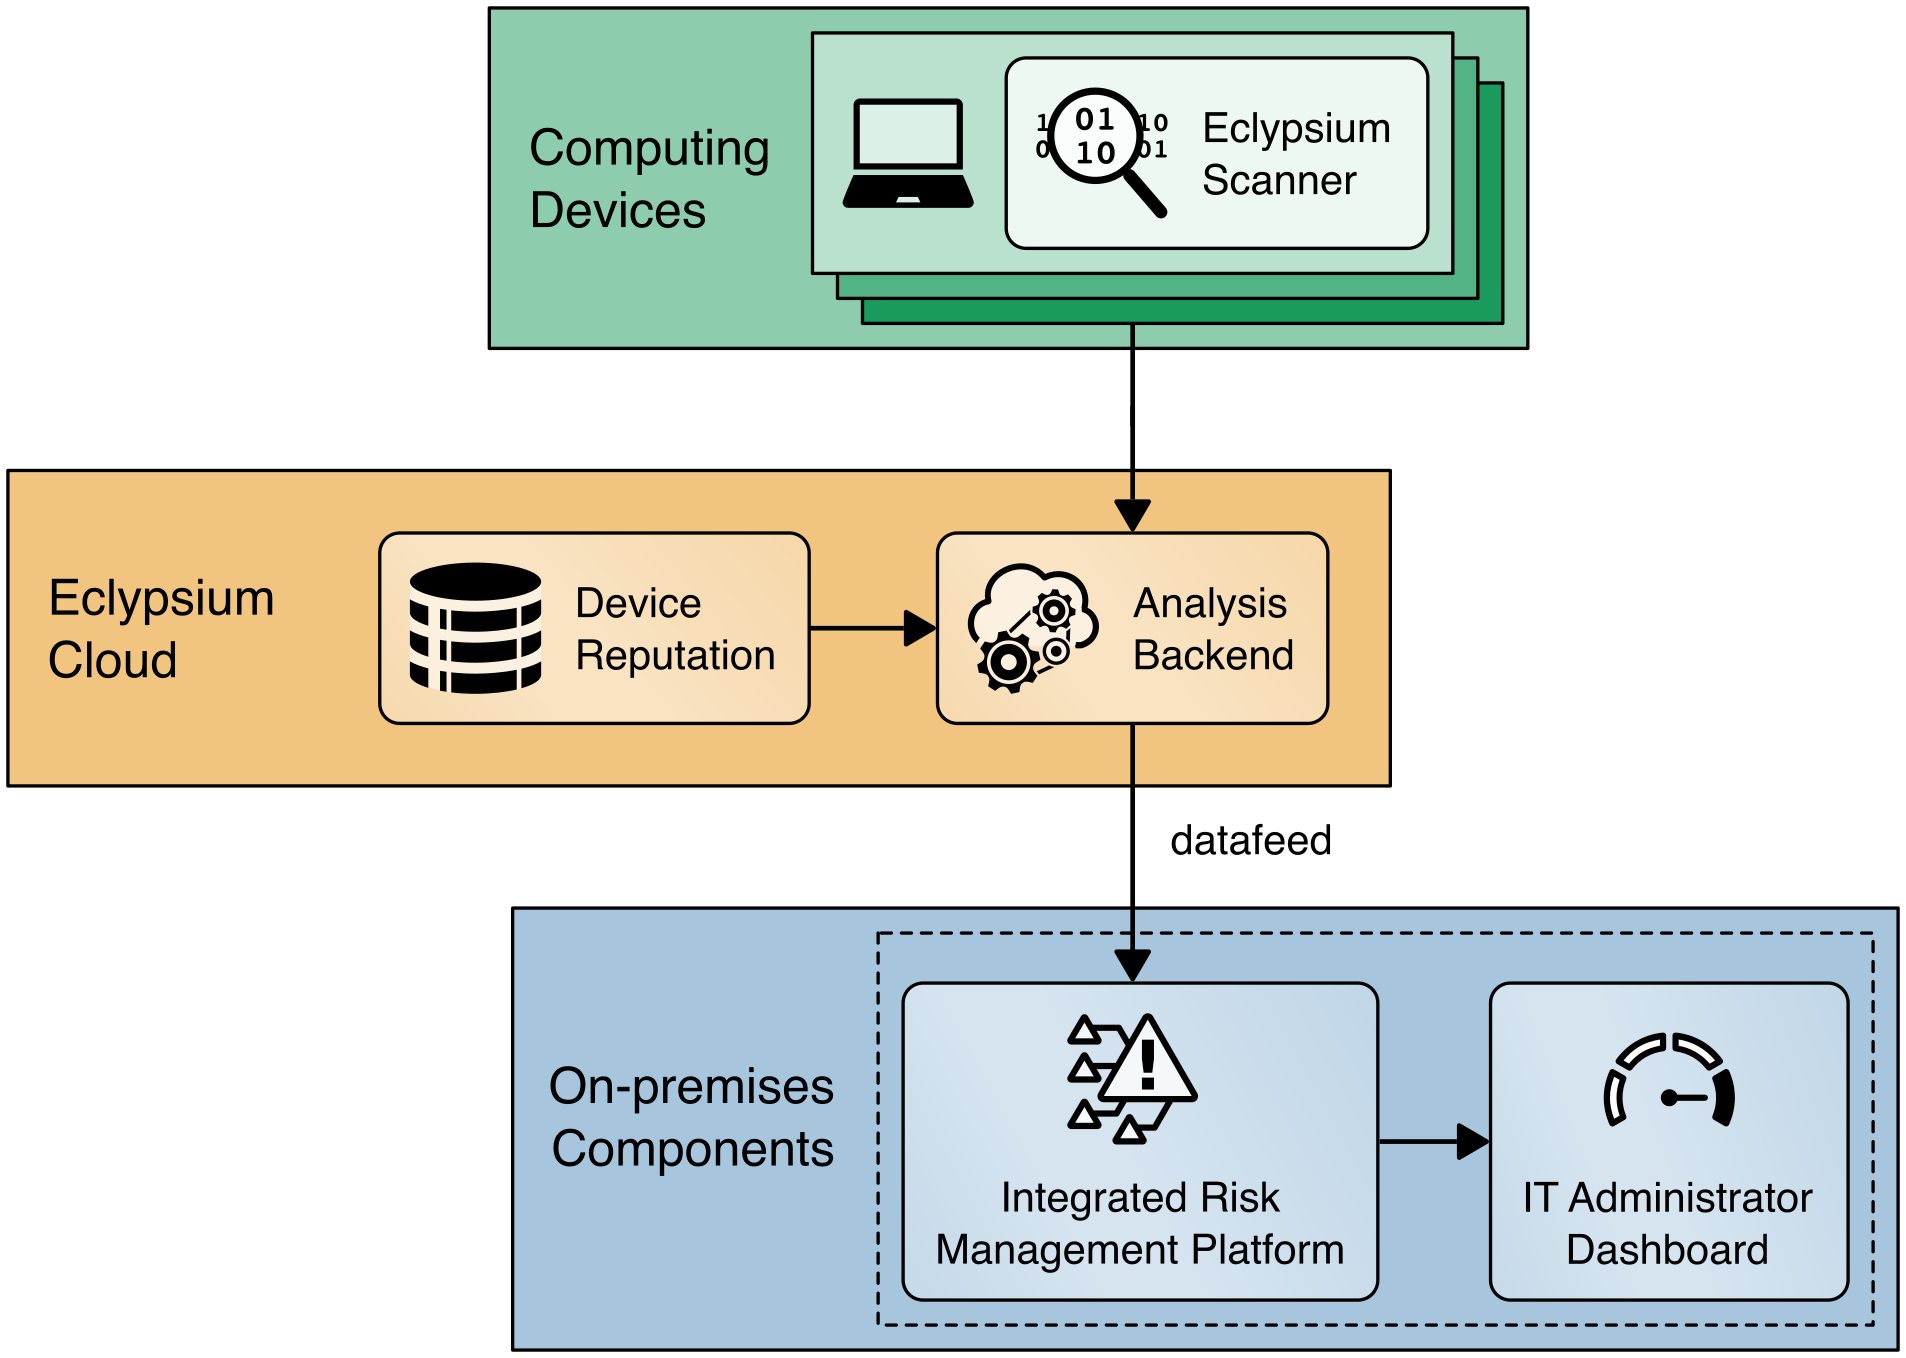 This diagram presents how this project integrates Eclypsium’s cloud services into the demonstration architecture for laptops.